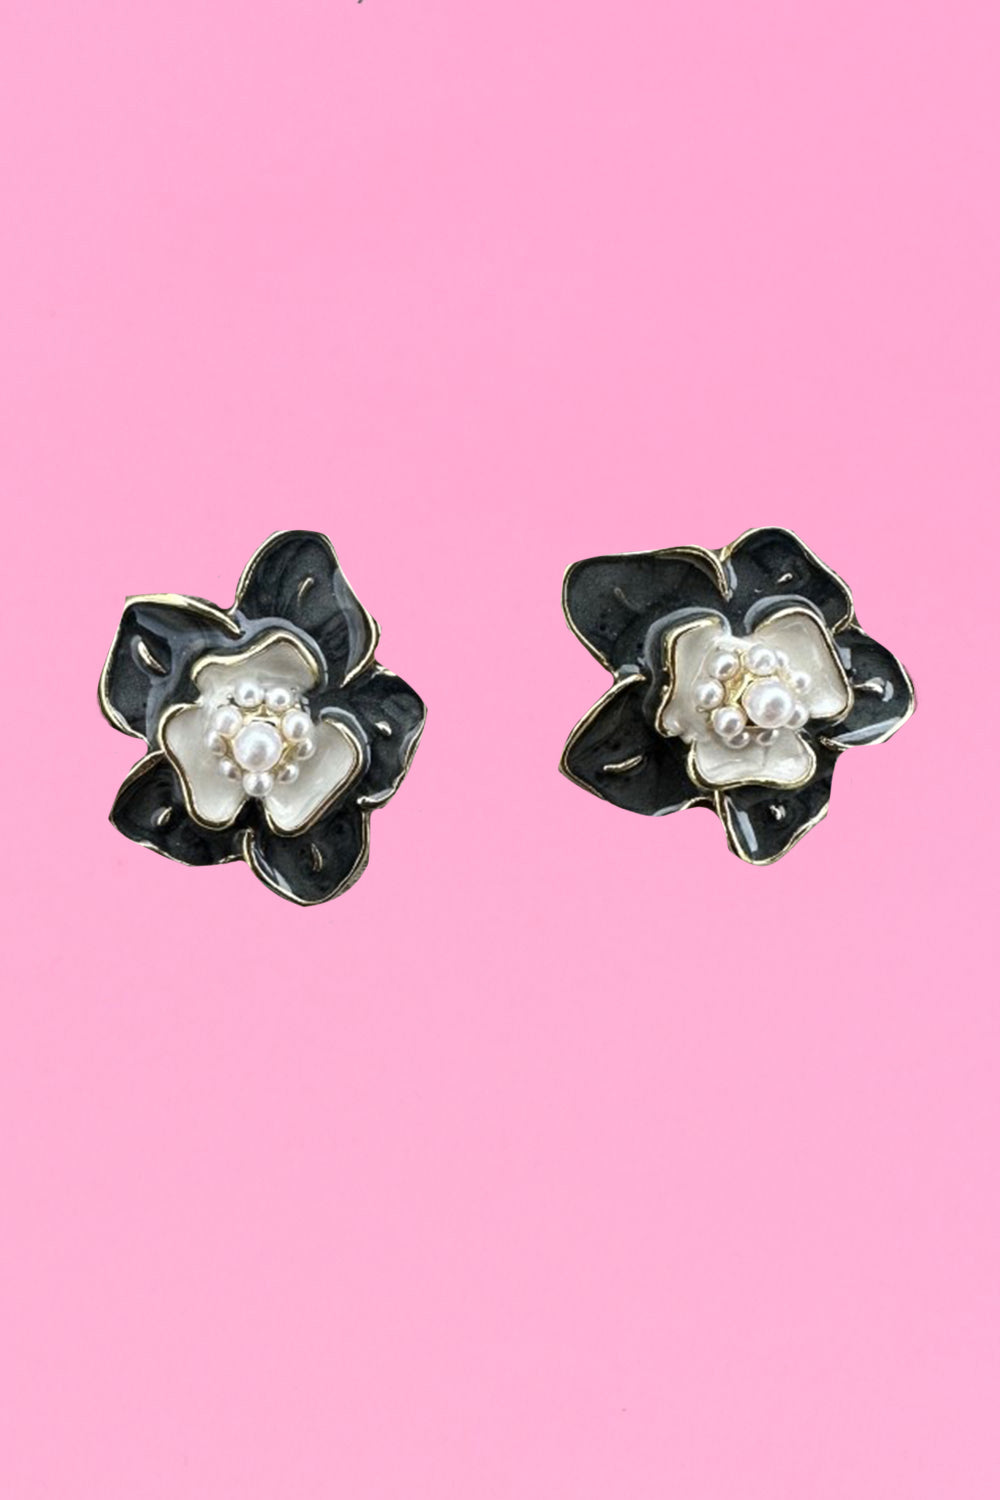 floral glam earrings in charcoal by Annah Stretton